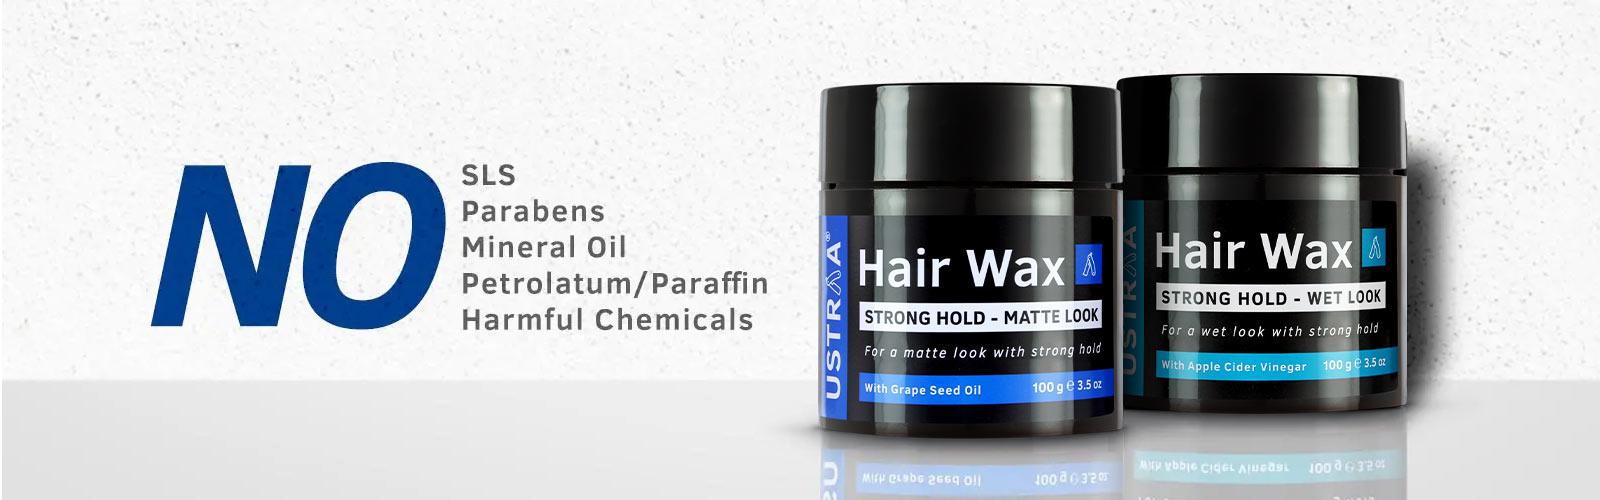 Hair Wax Strong hold